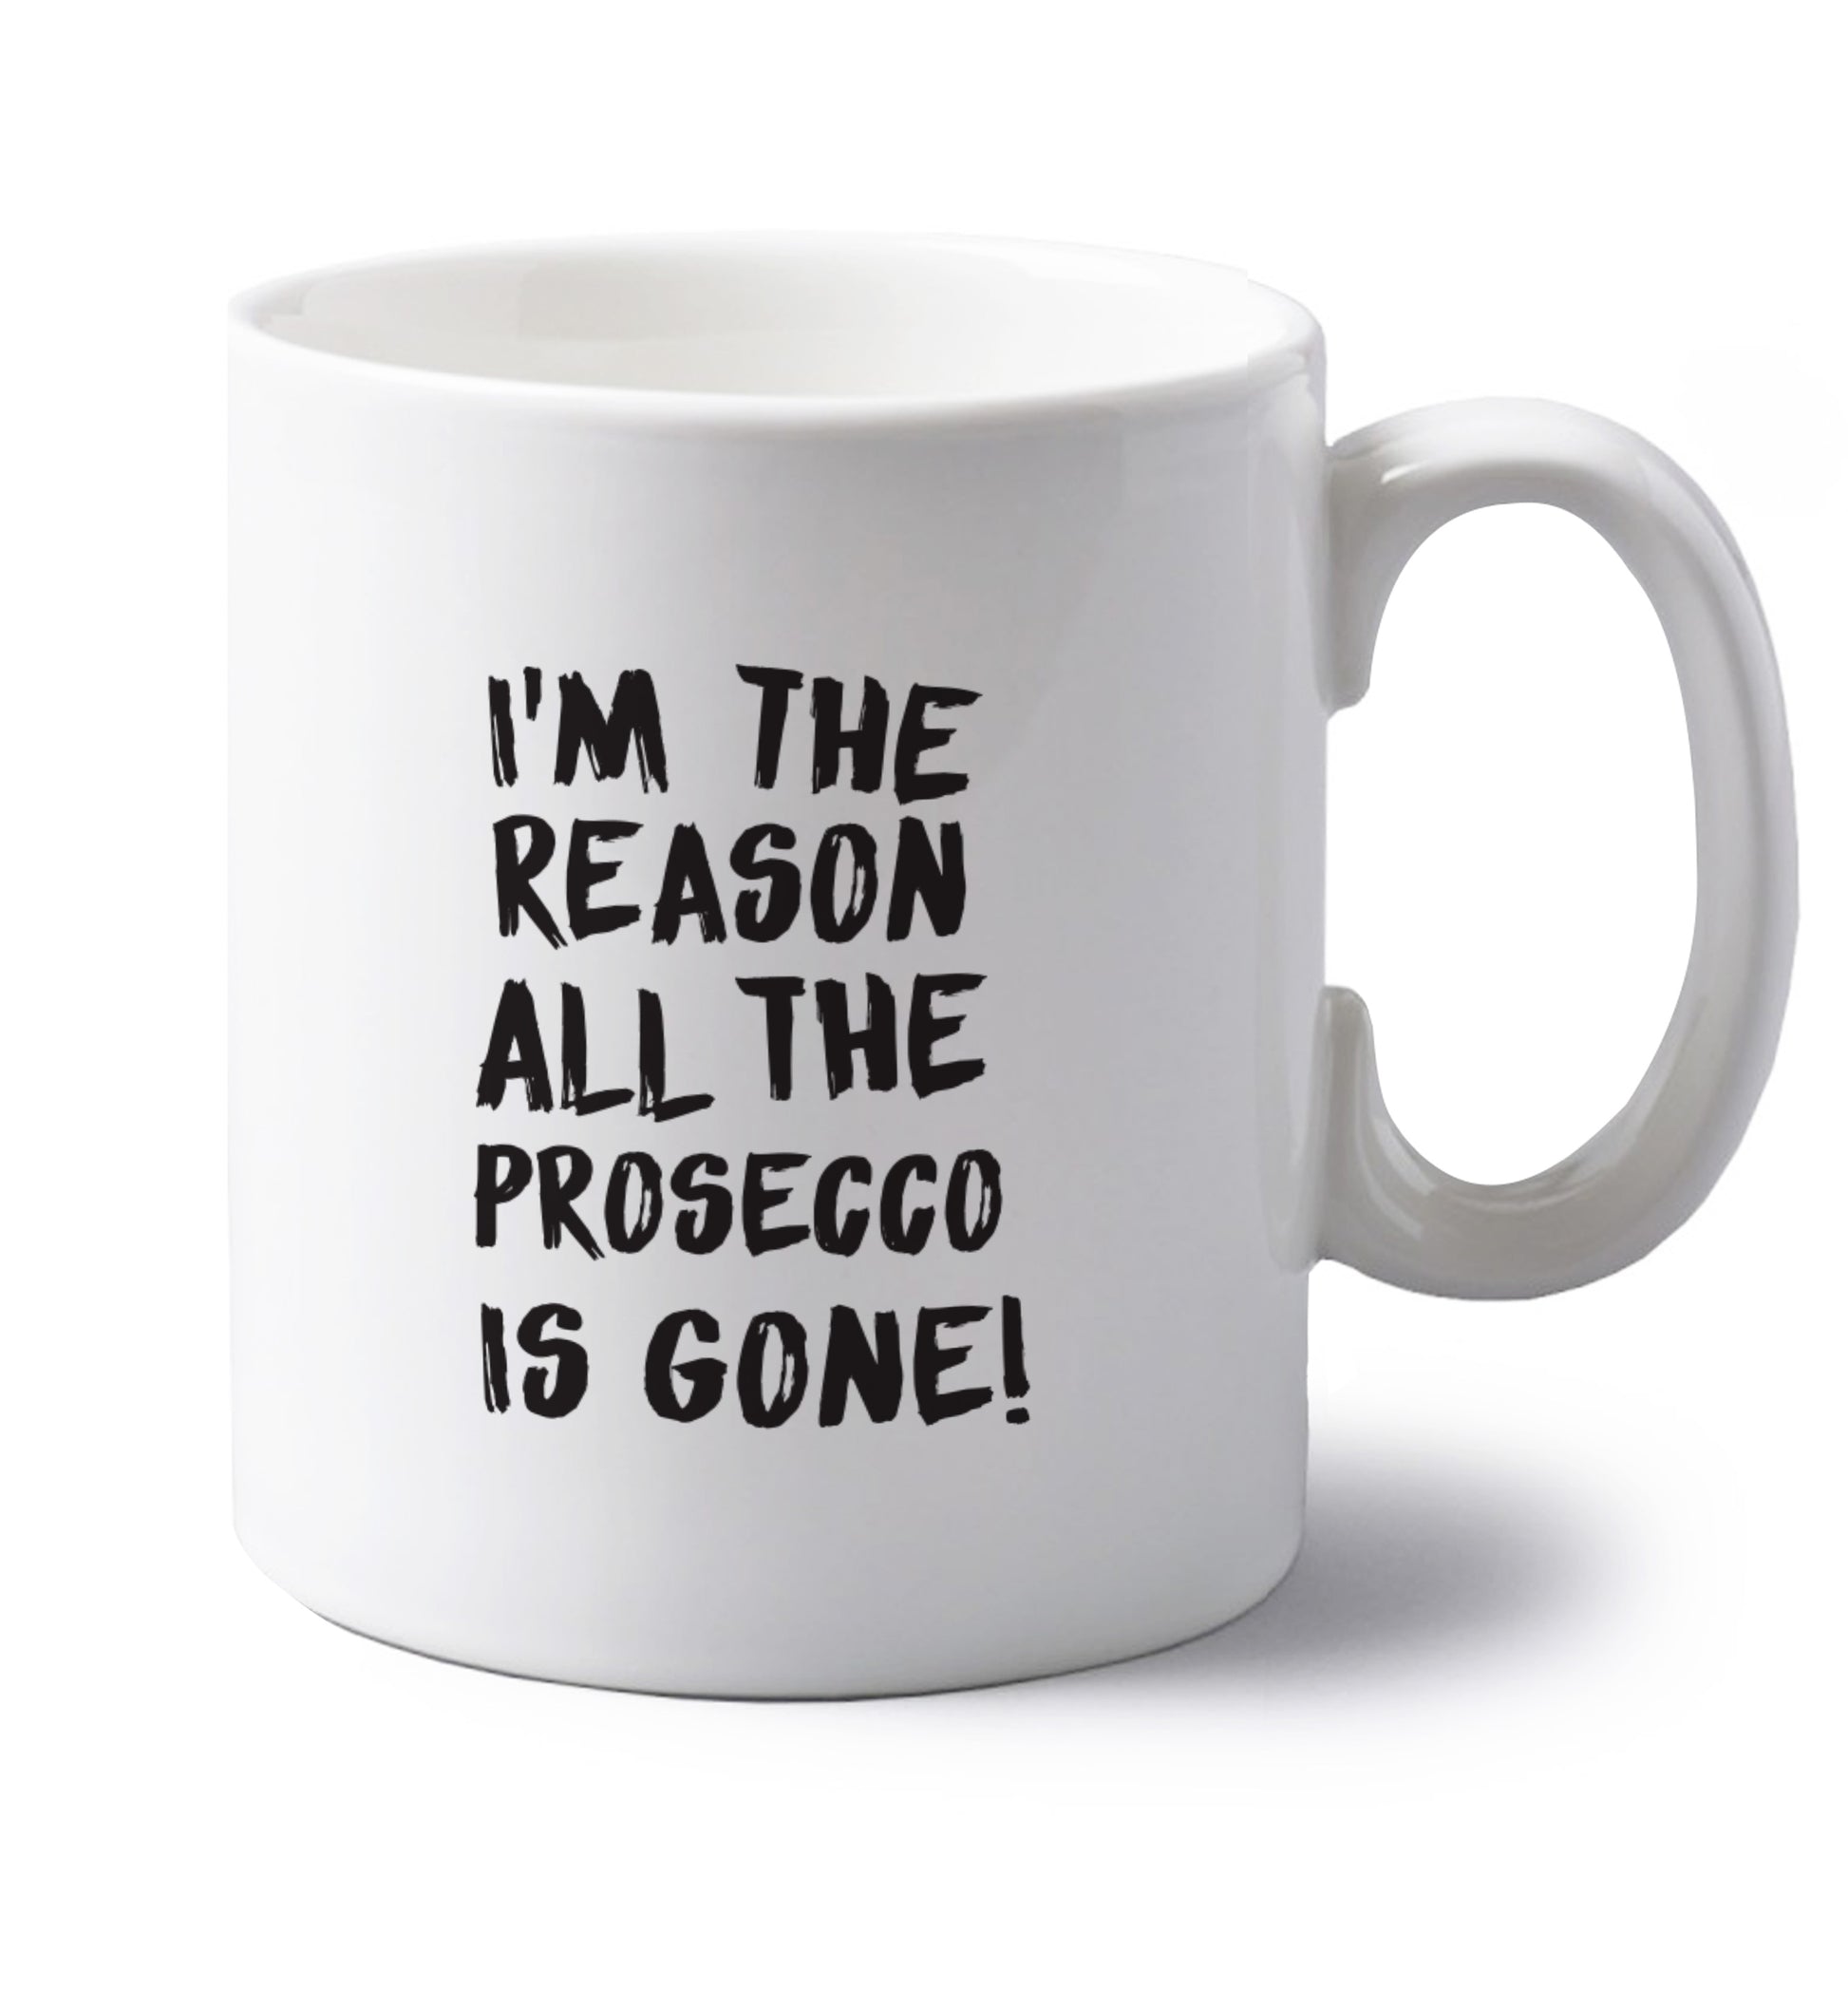 I'm the reason all the prosecco is gone left handed white ceramic mug 